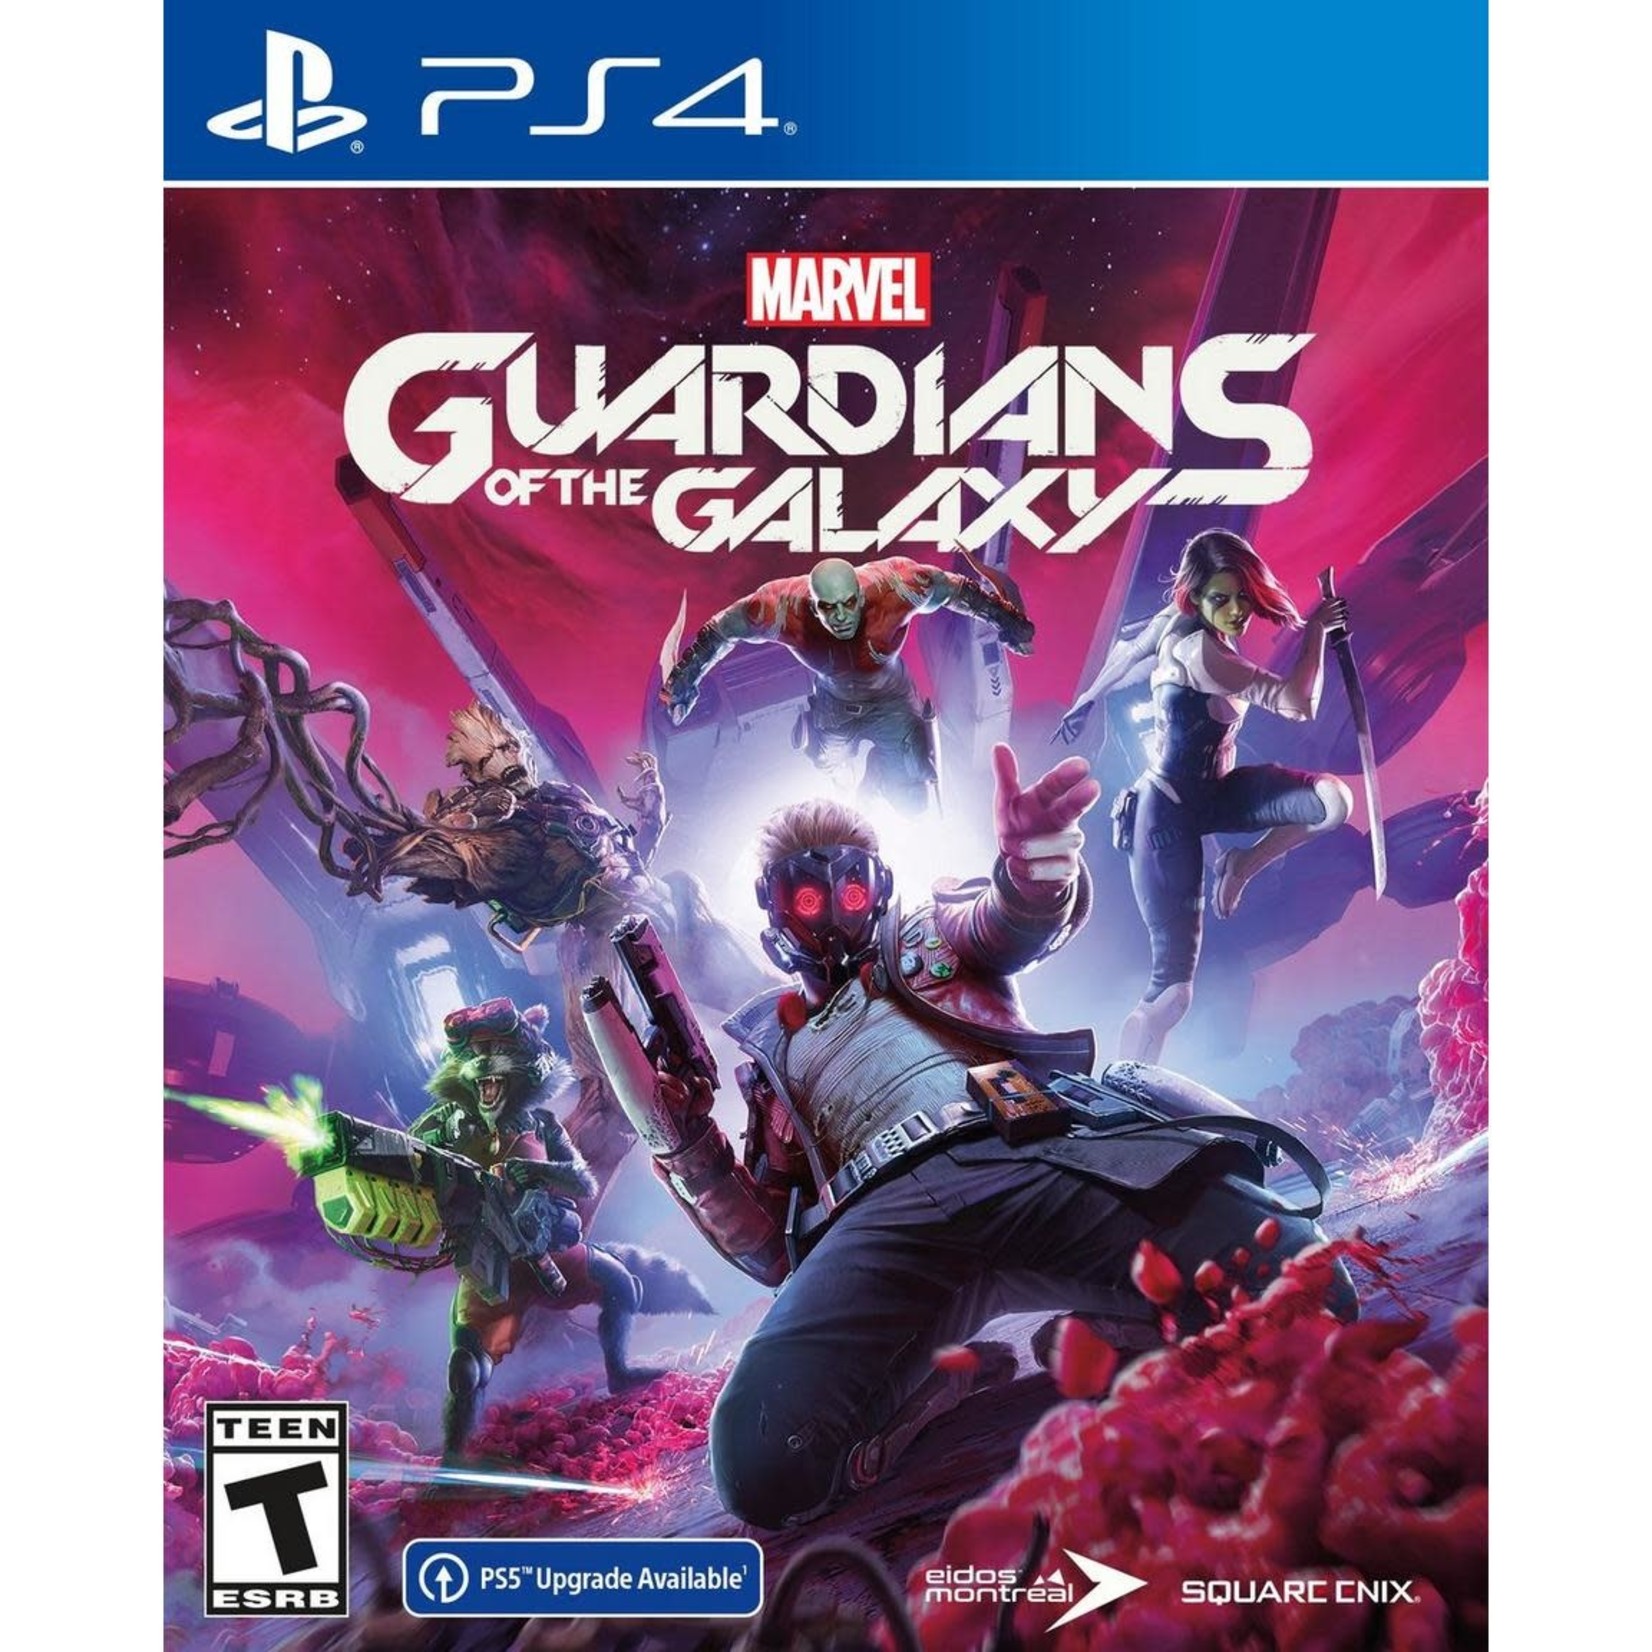 PS4-Marvel's Guardians of the Galaxy